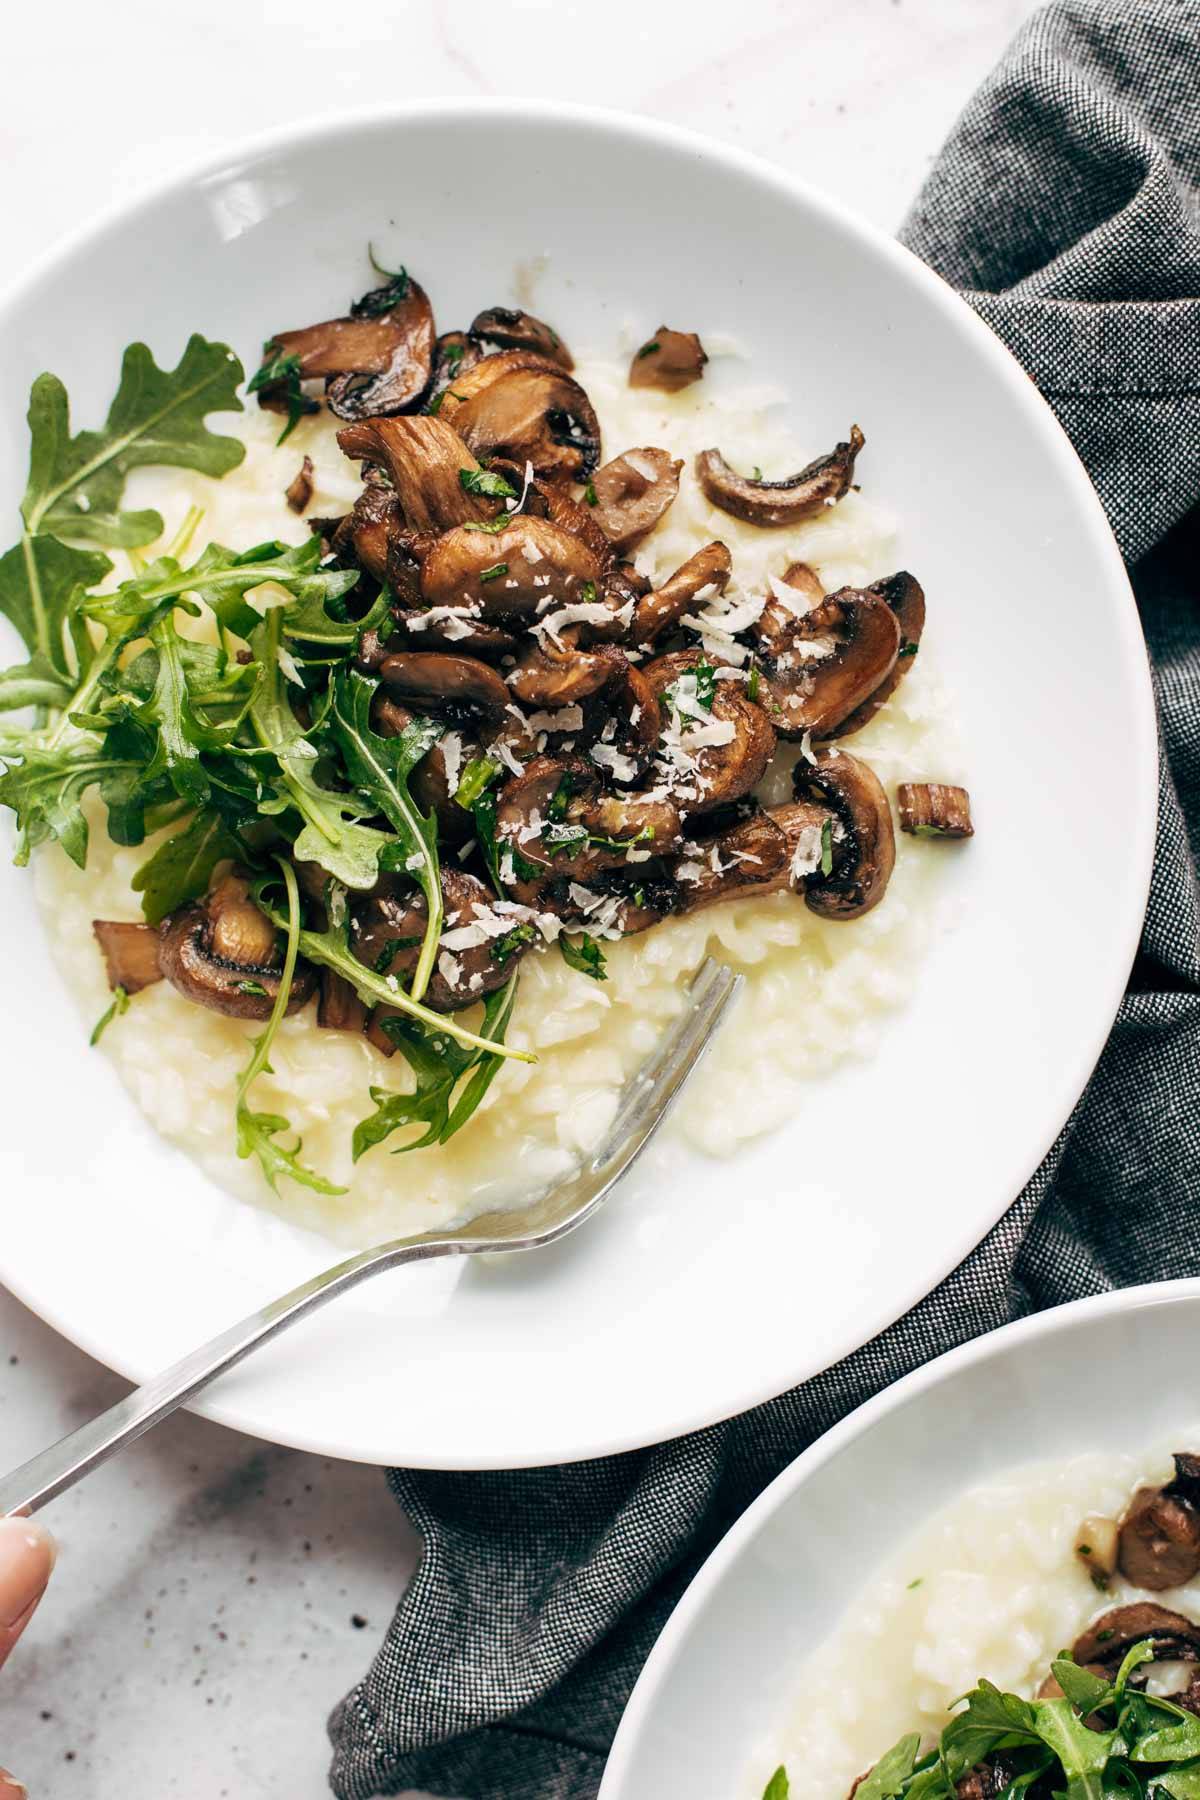 Oven risotto with mushrooms in bowl.